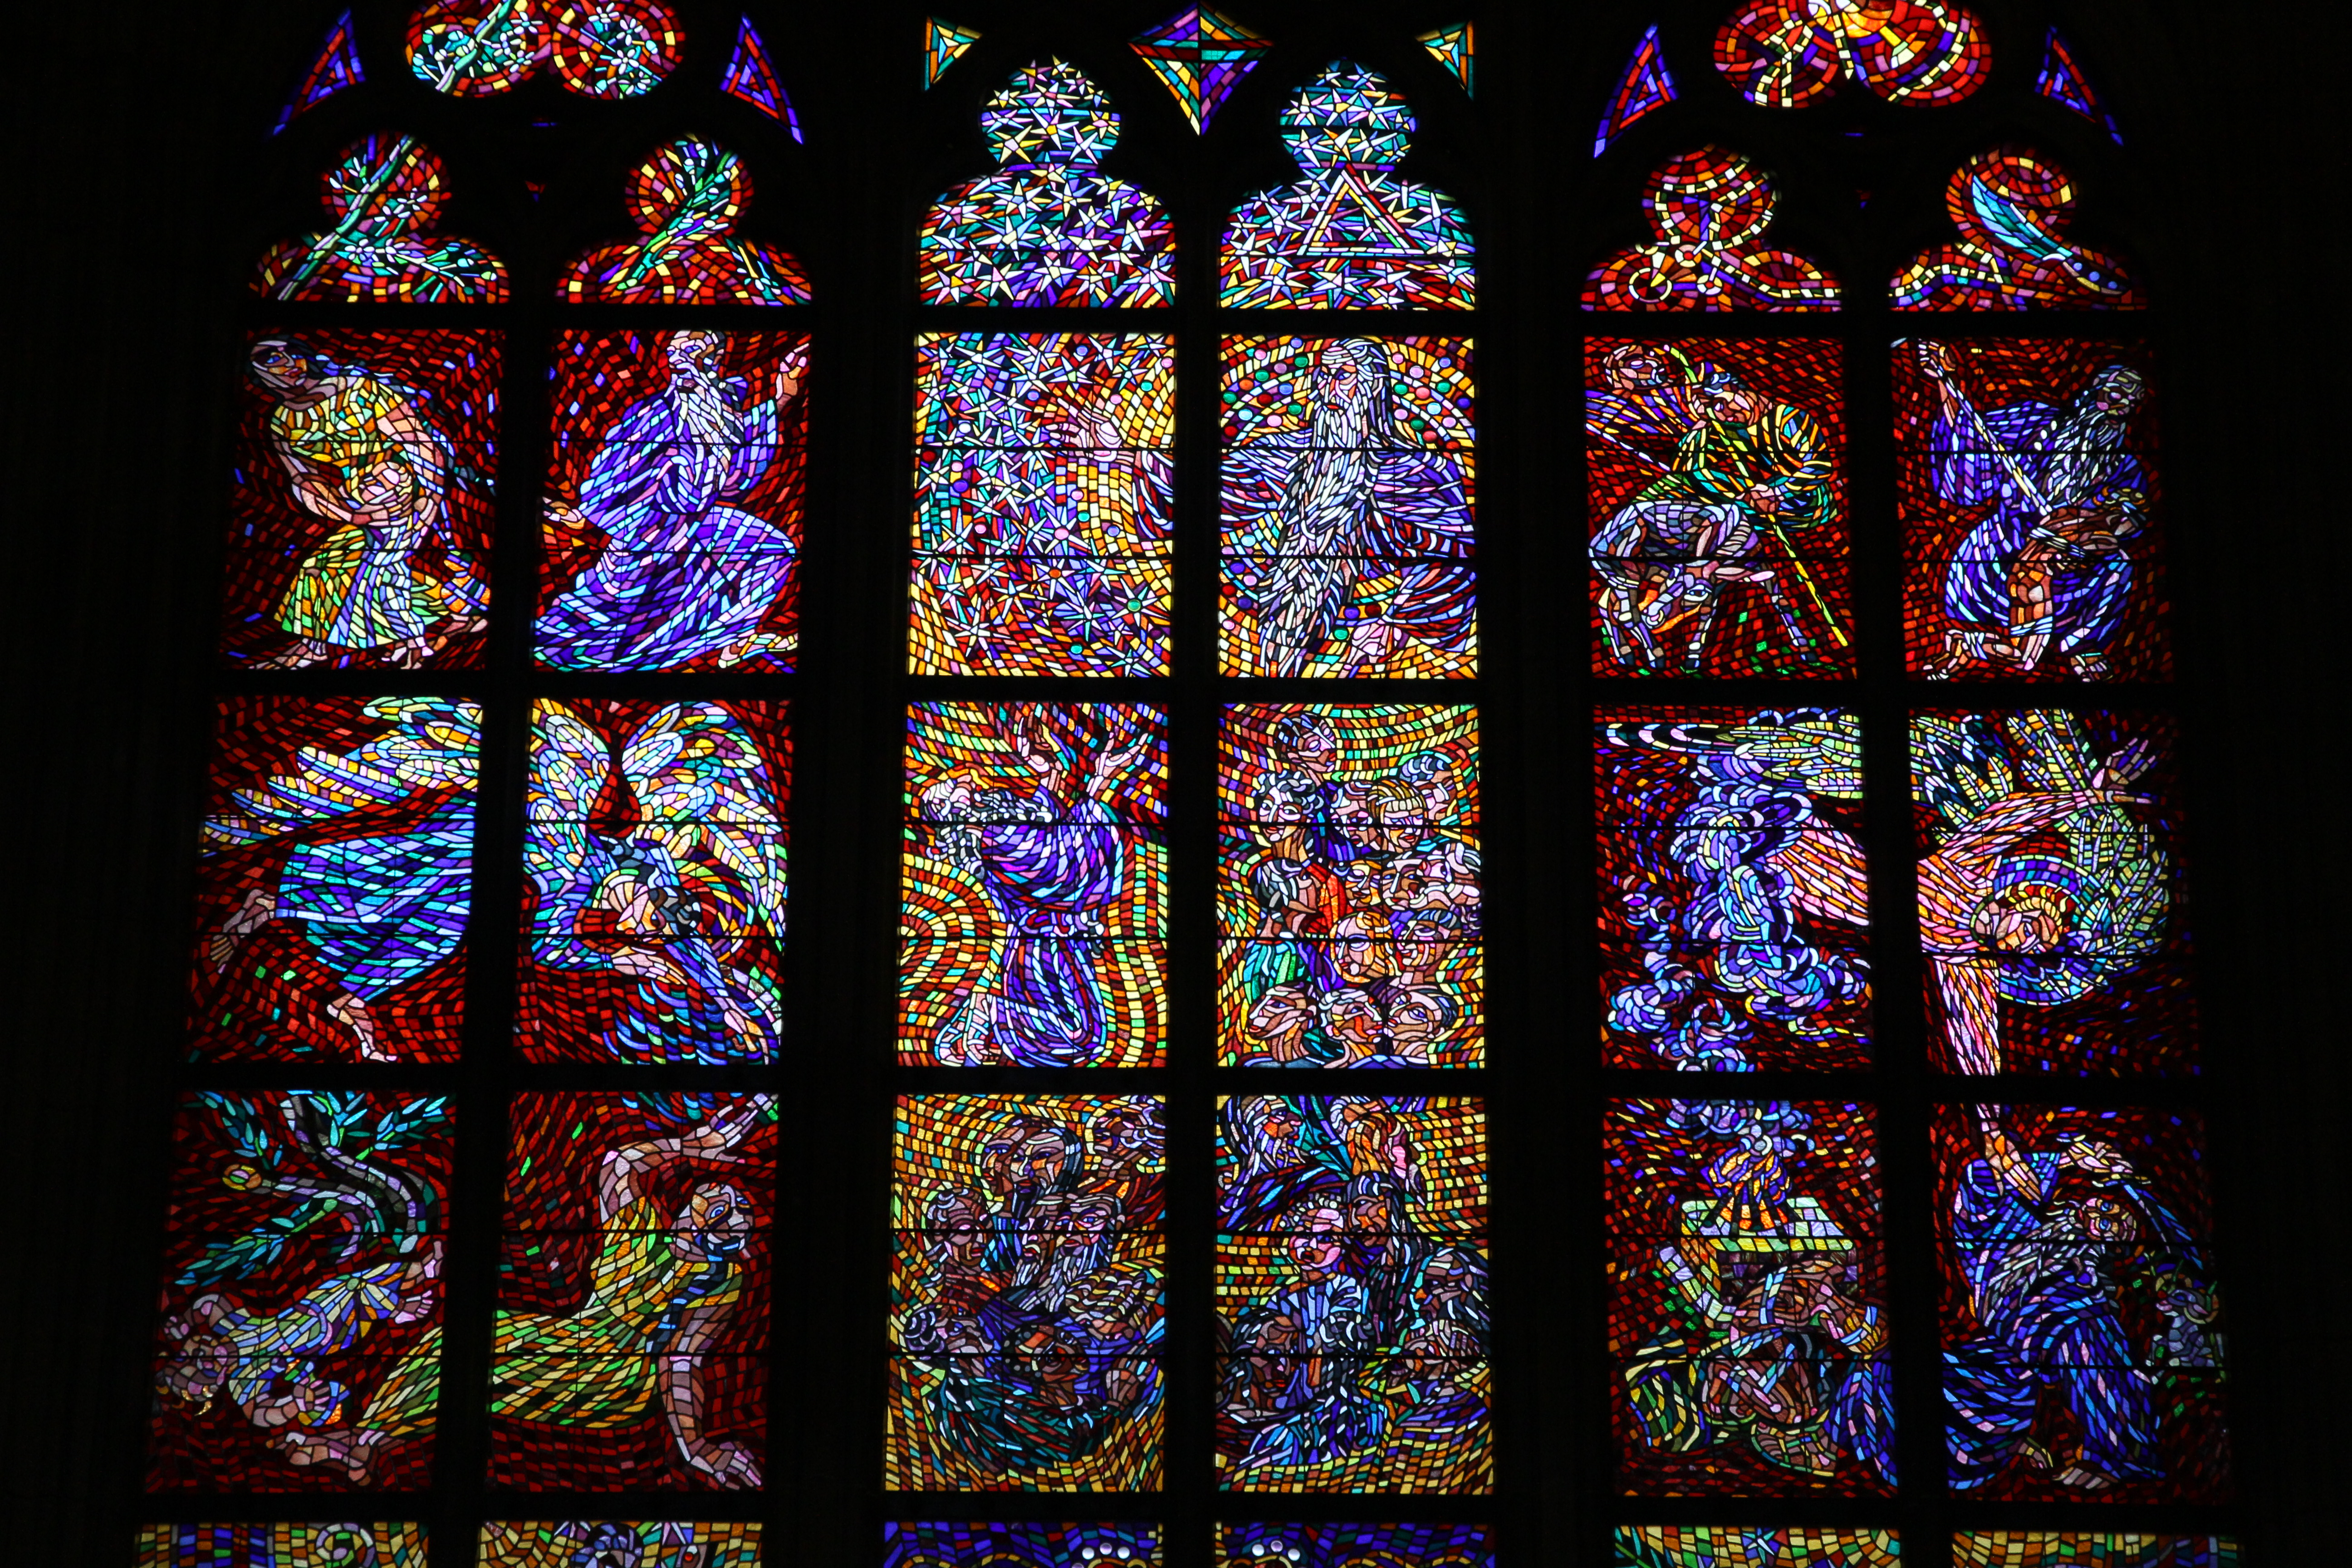 Stained glass art in St. Vitus